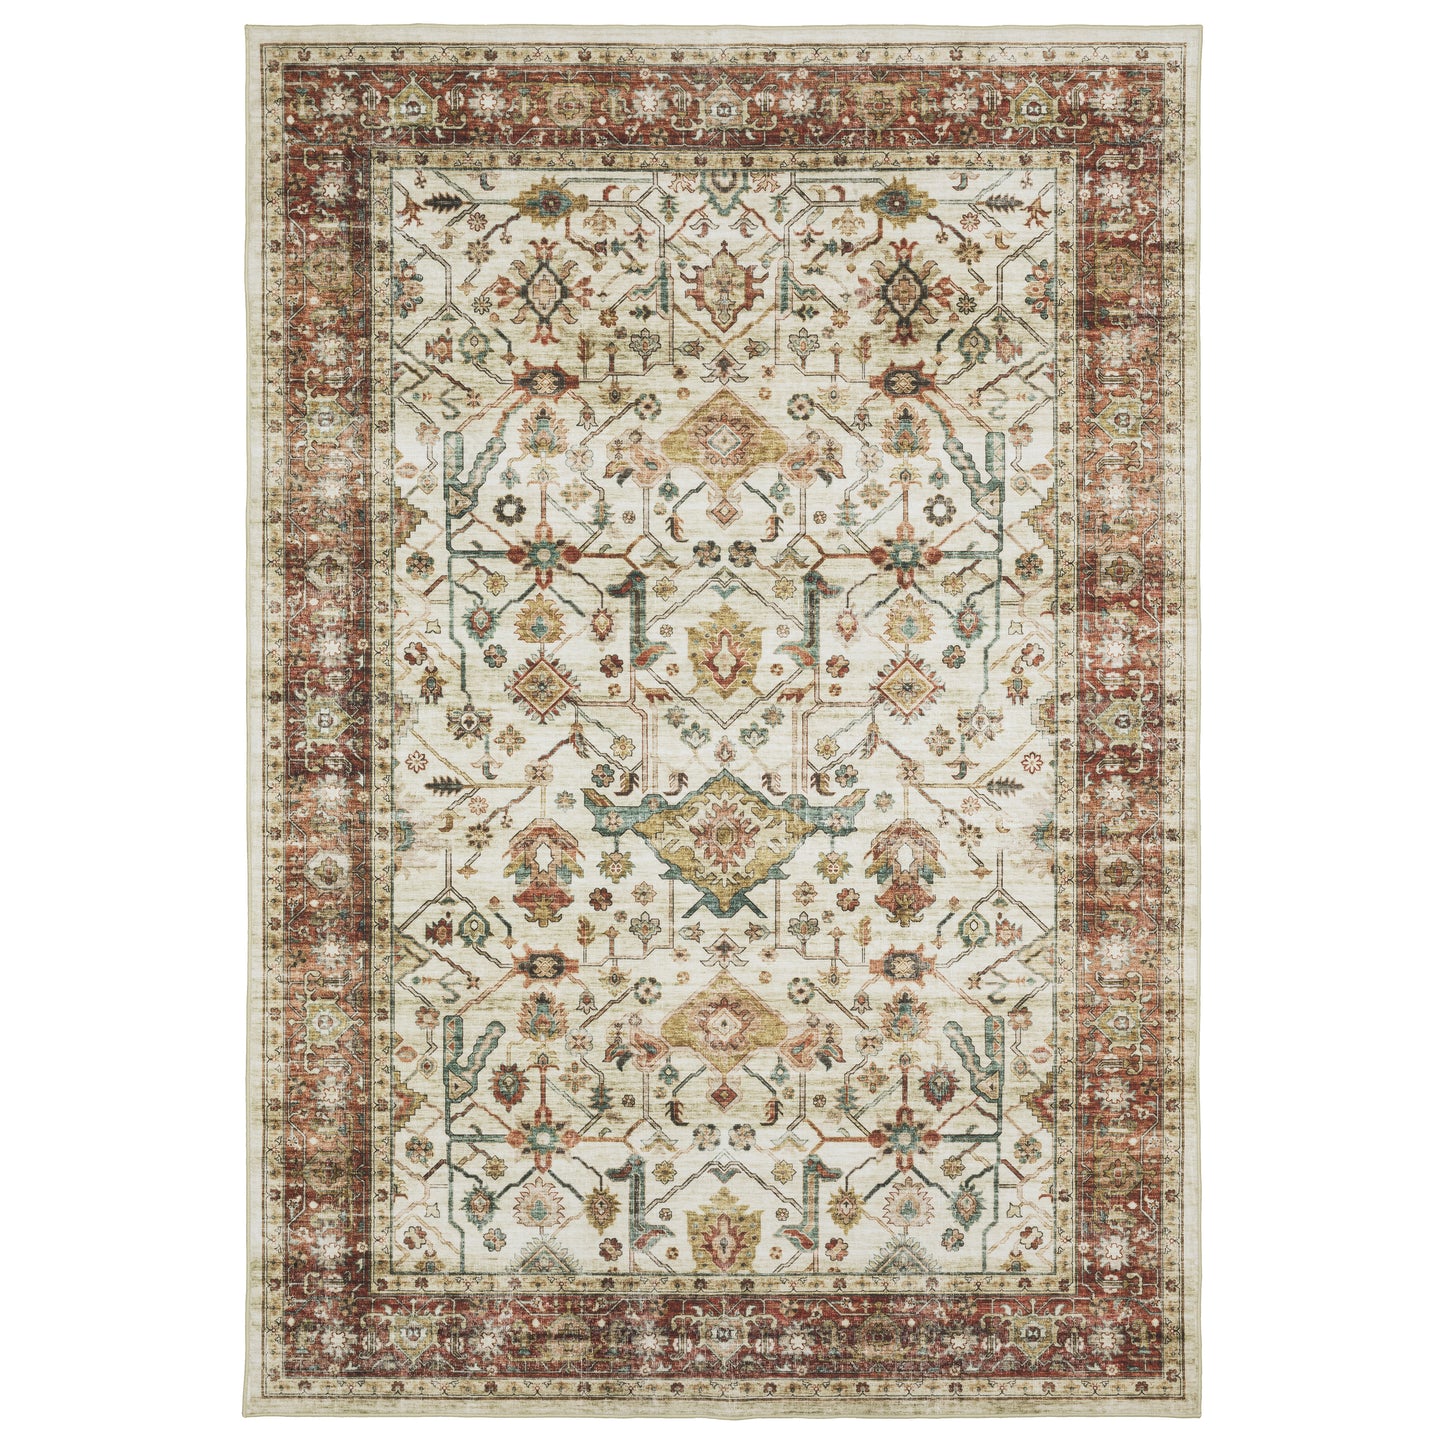 SUMTER Distressed Machine-Print Synthetic Blend Indoor Area Rug by Oriental Weavers